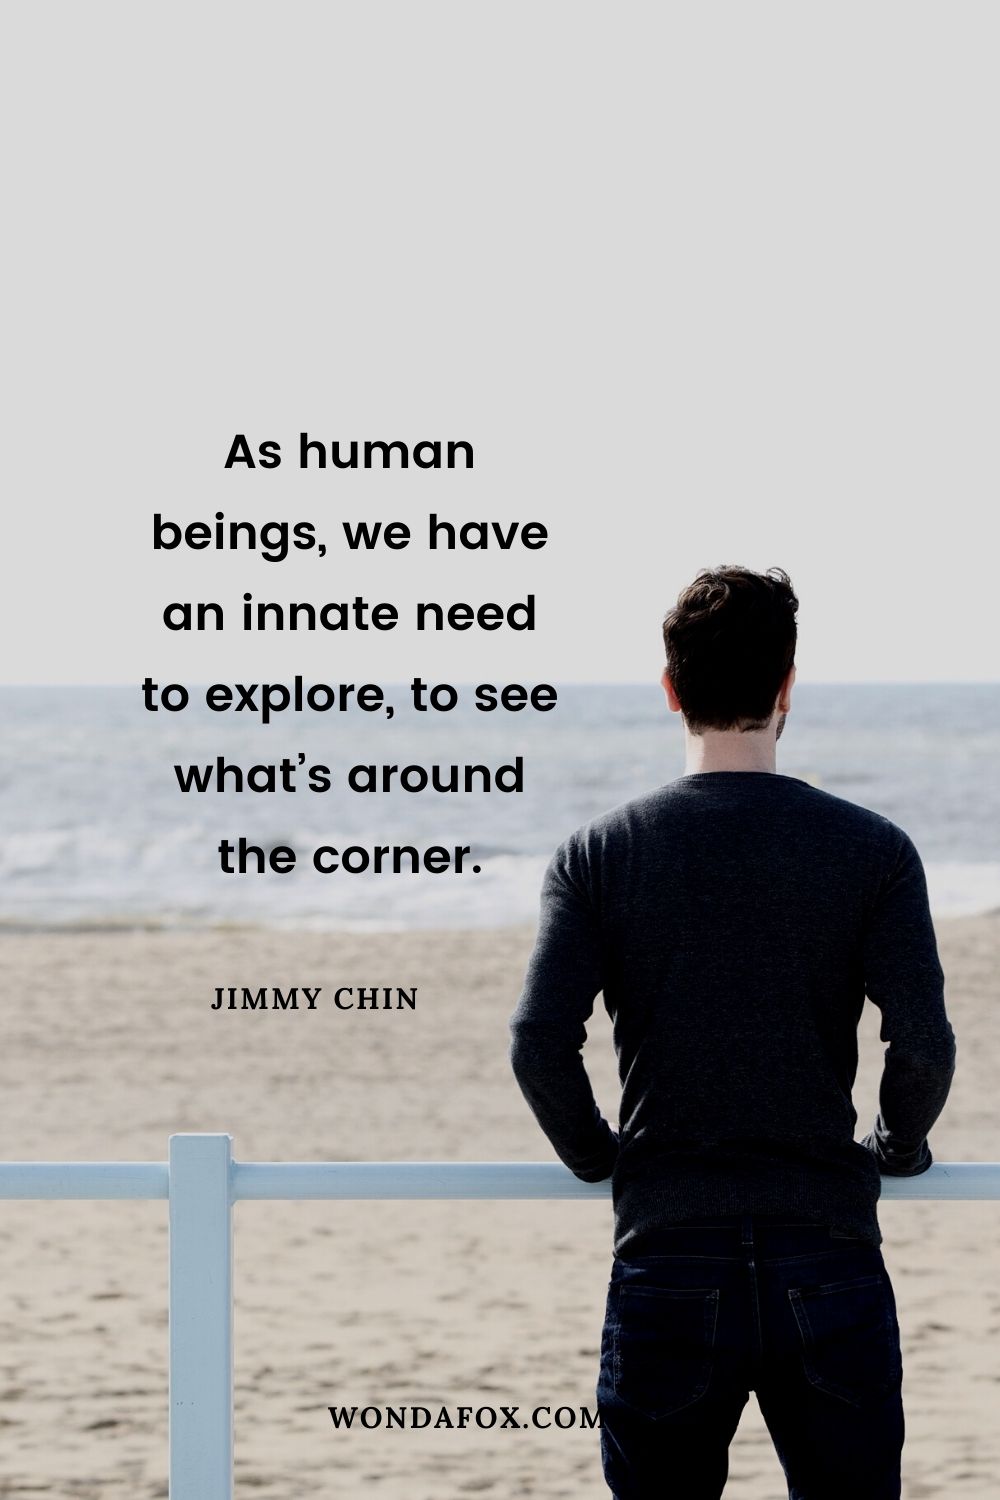 As human beings, we have an innate need to explore, to see what’s around the corner.